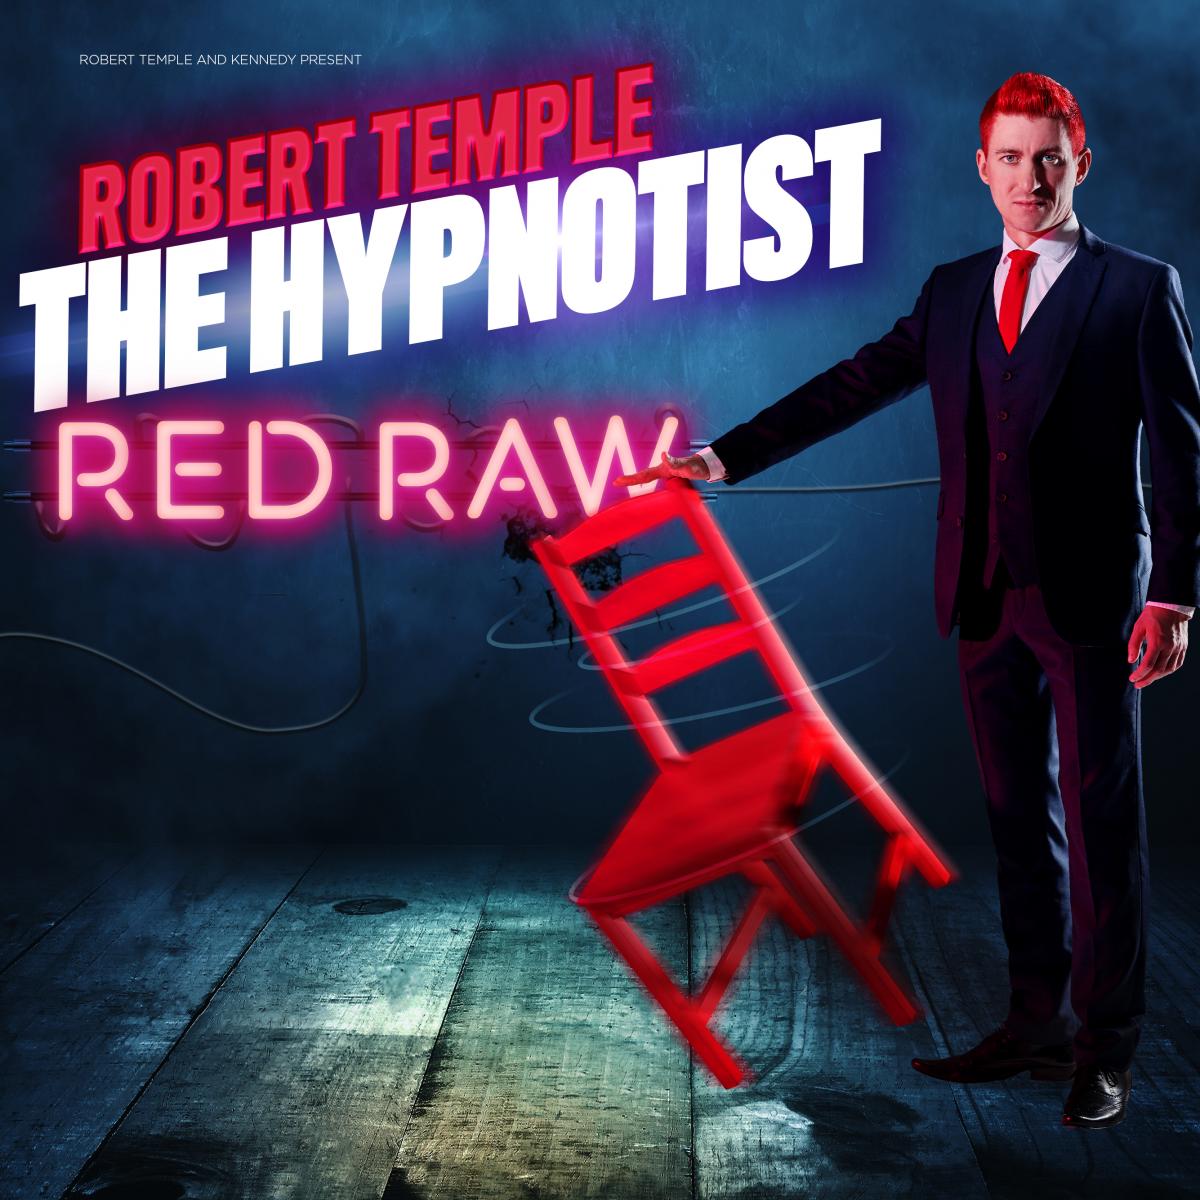 Robert Temple: The Hyponotist Red Raw on 17 September 2022